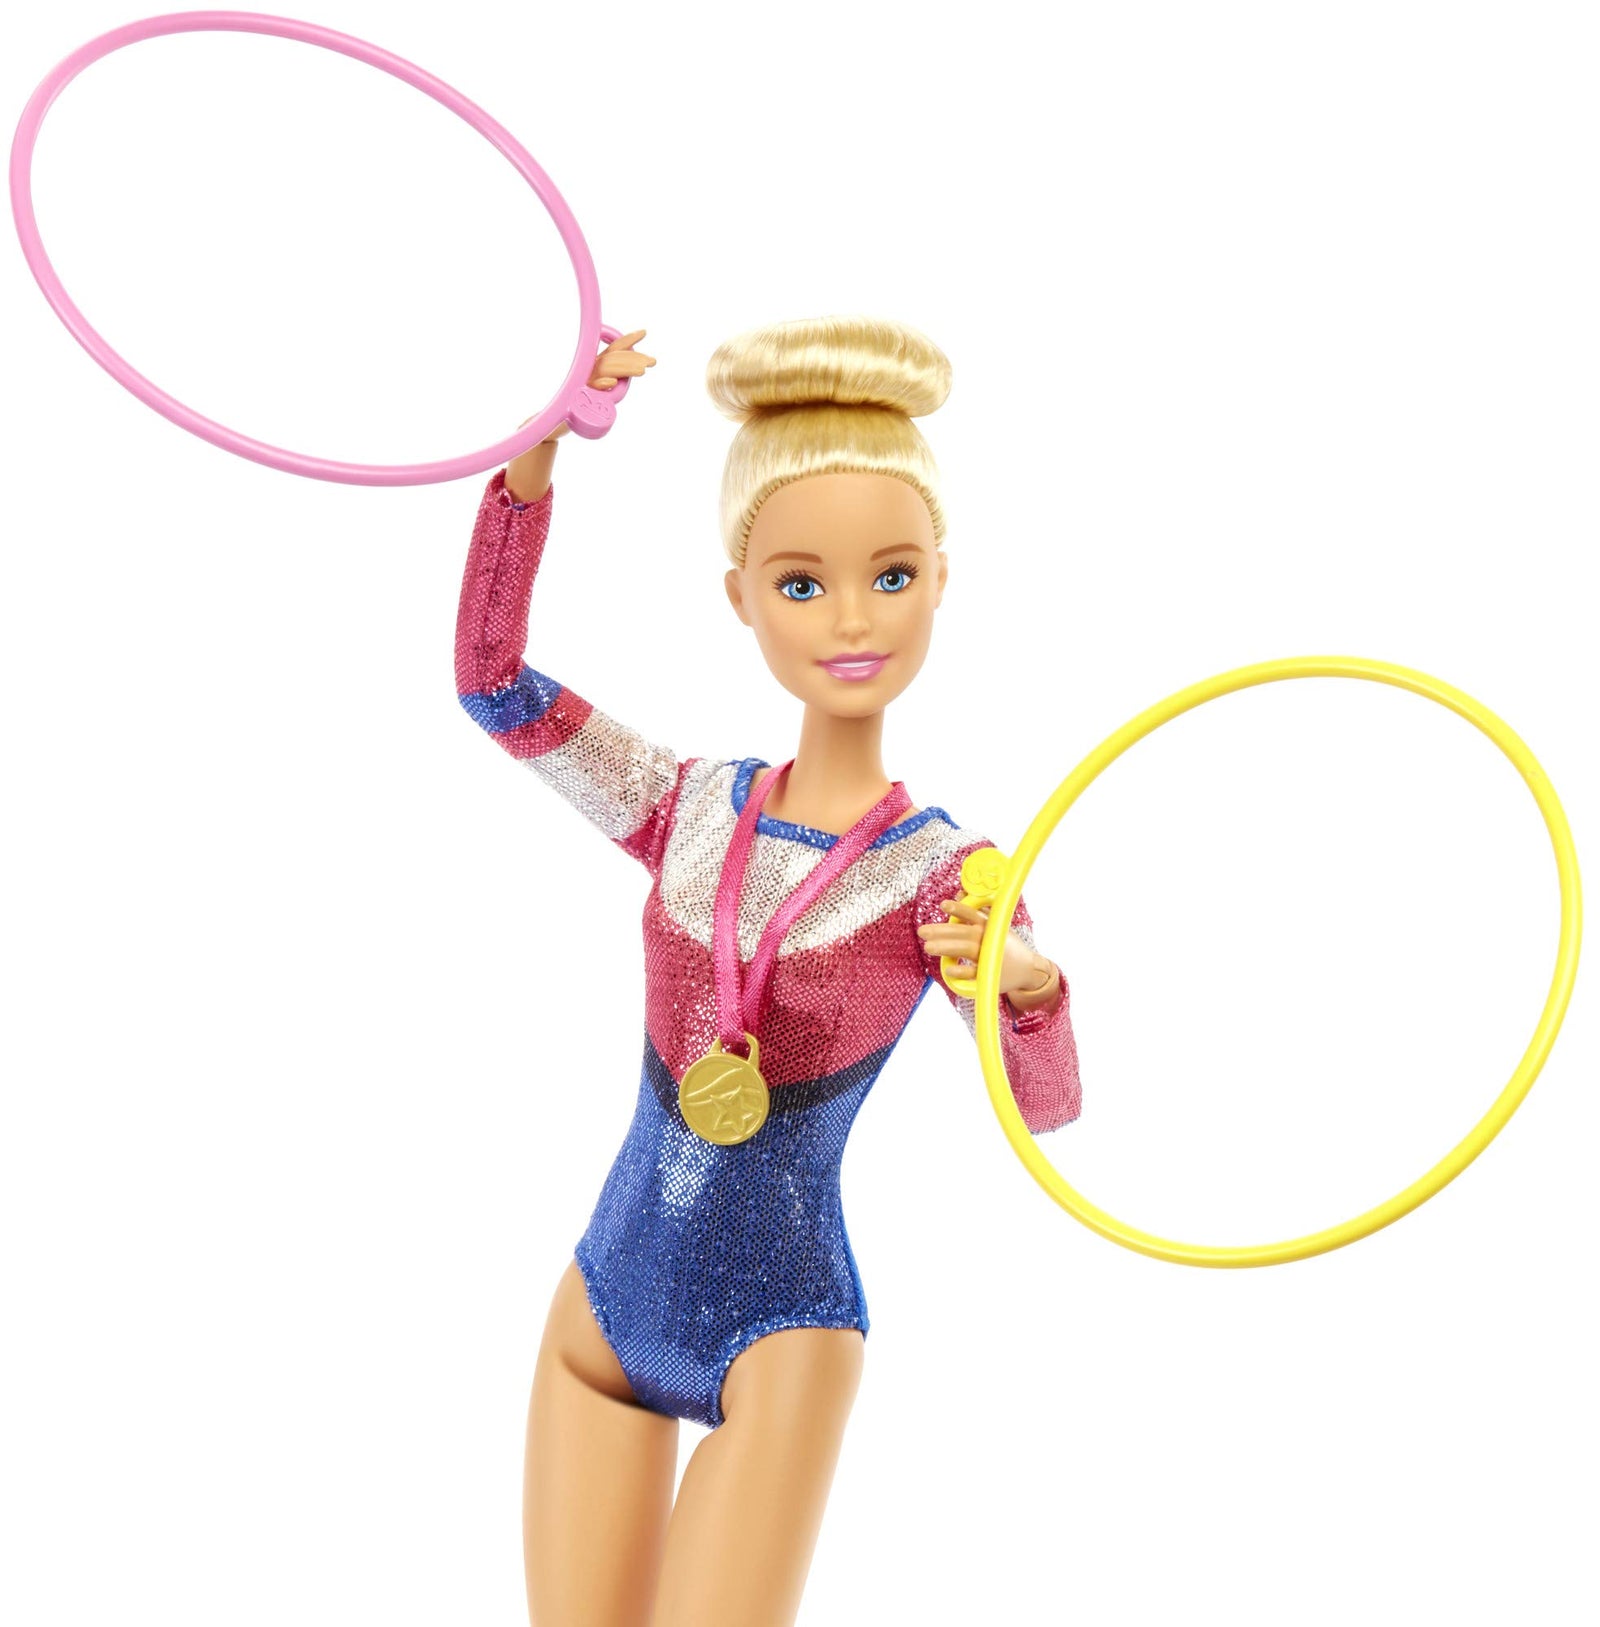 Barbie Gymnastics Playset: Barbie Doll with Twirling Feature, Balance Beam, 15+ Accessories for Ages 3 and Up